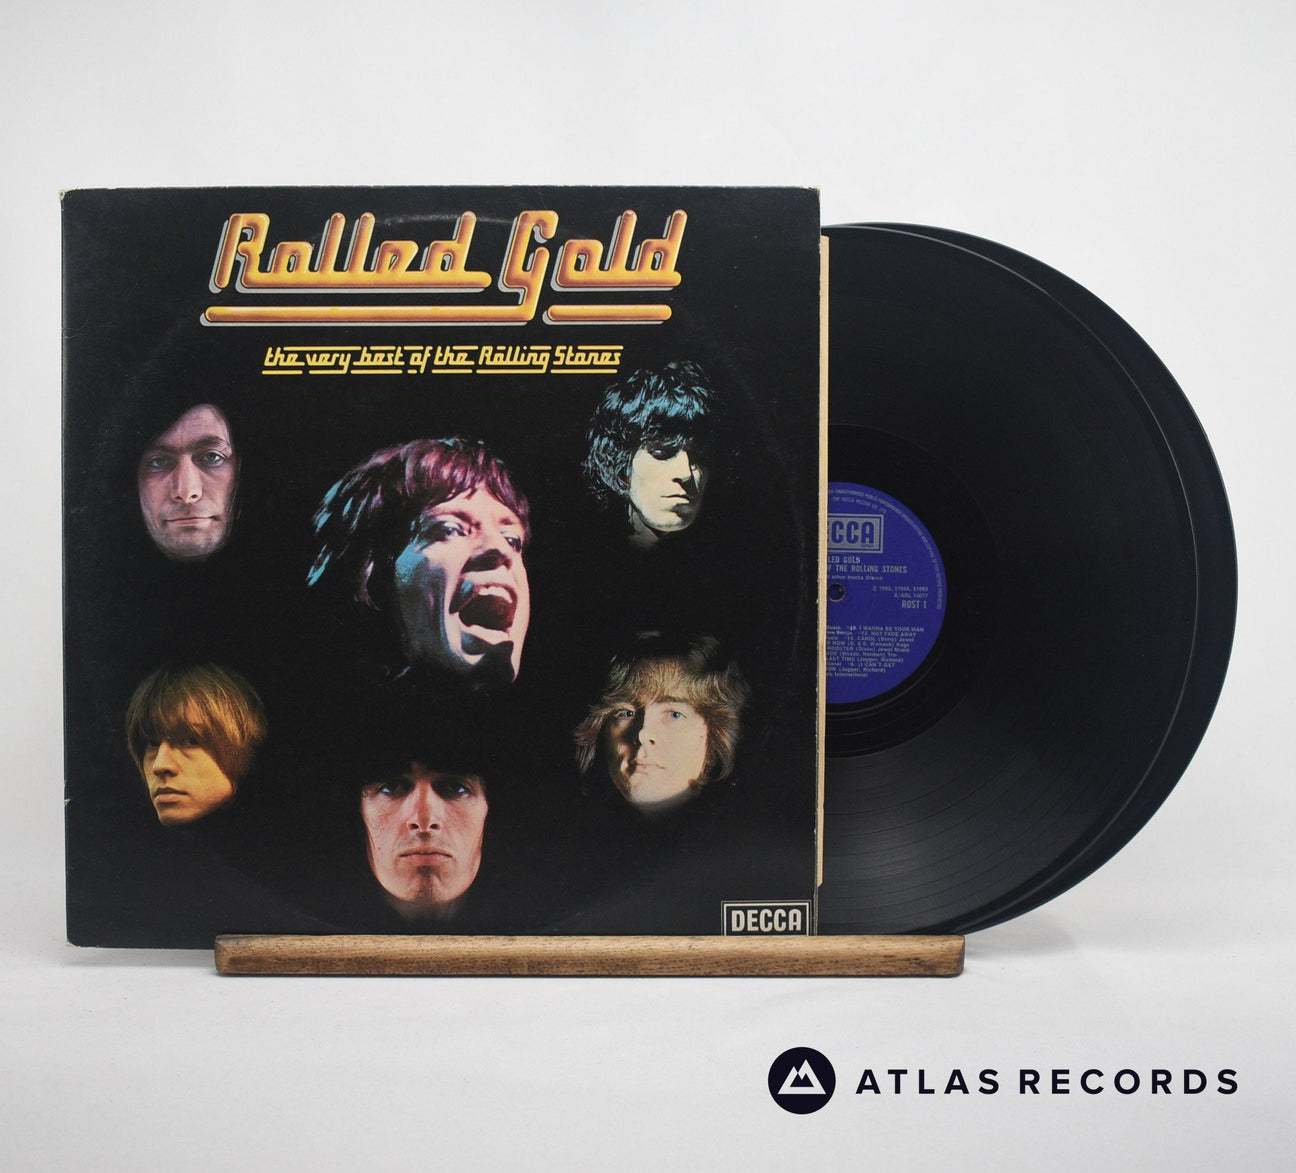 The Rolling Stones Rolled Gold - The Very Best Of The Rolling Stones Double LP Vinyl Record - Front Cover & Record